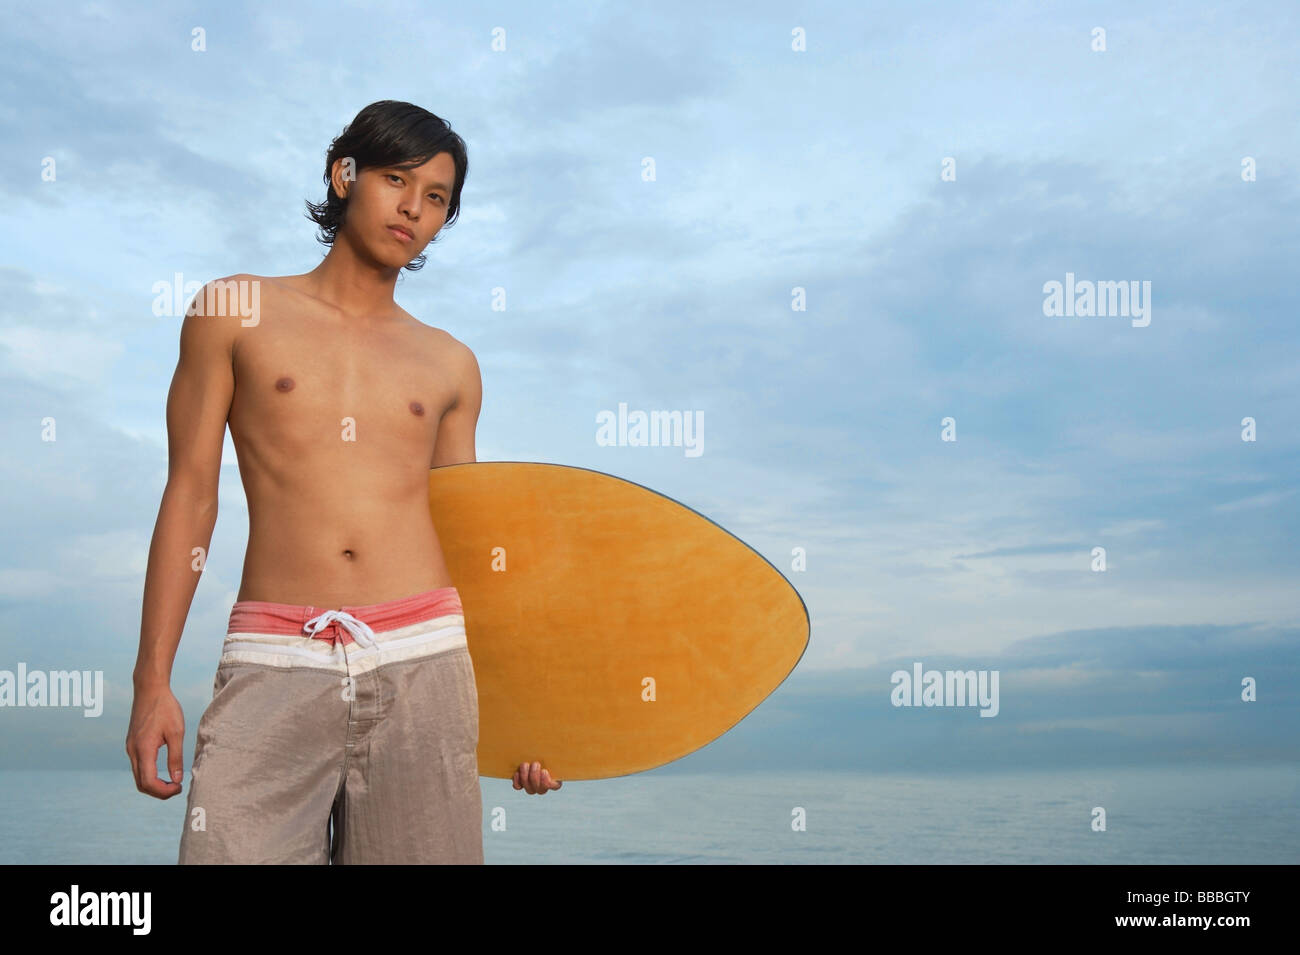 Young man with skimboard, looking at camera Stock Photo